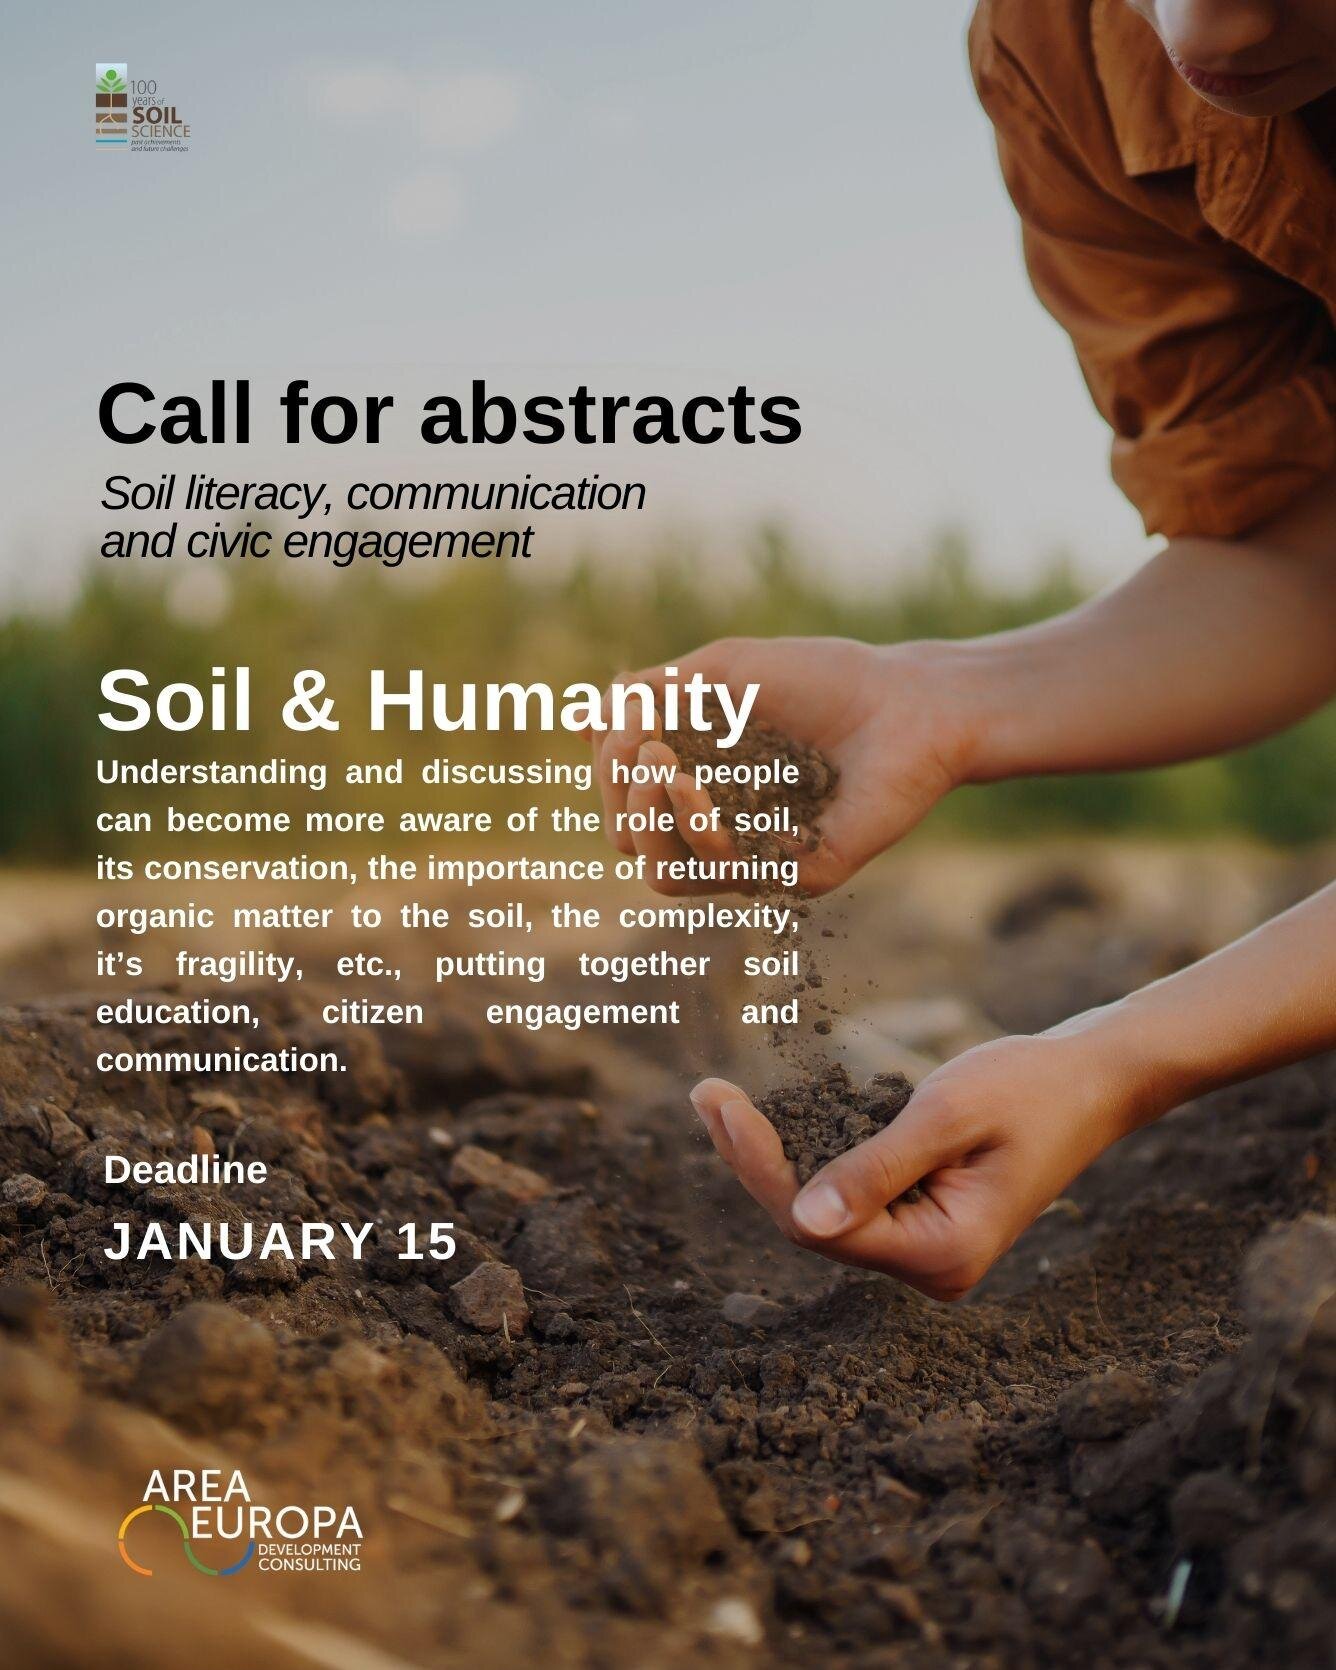 📣The International Union of Soil Sciences, alongside the Italian Society of Soil Science and the City of Florence, will host the Centennial Celebration and Congress in Florence, Italy from May 19-21, 2024. 
@aimgroupinternational 

This will be an a